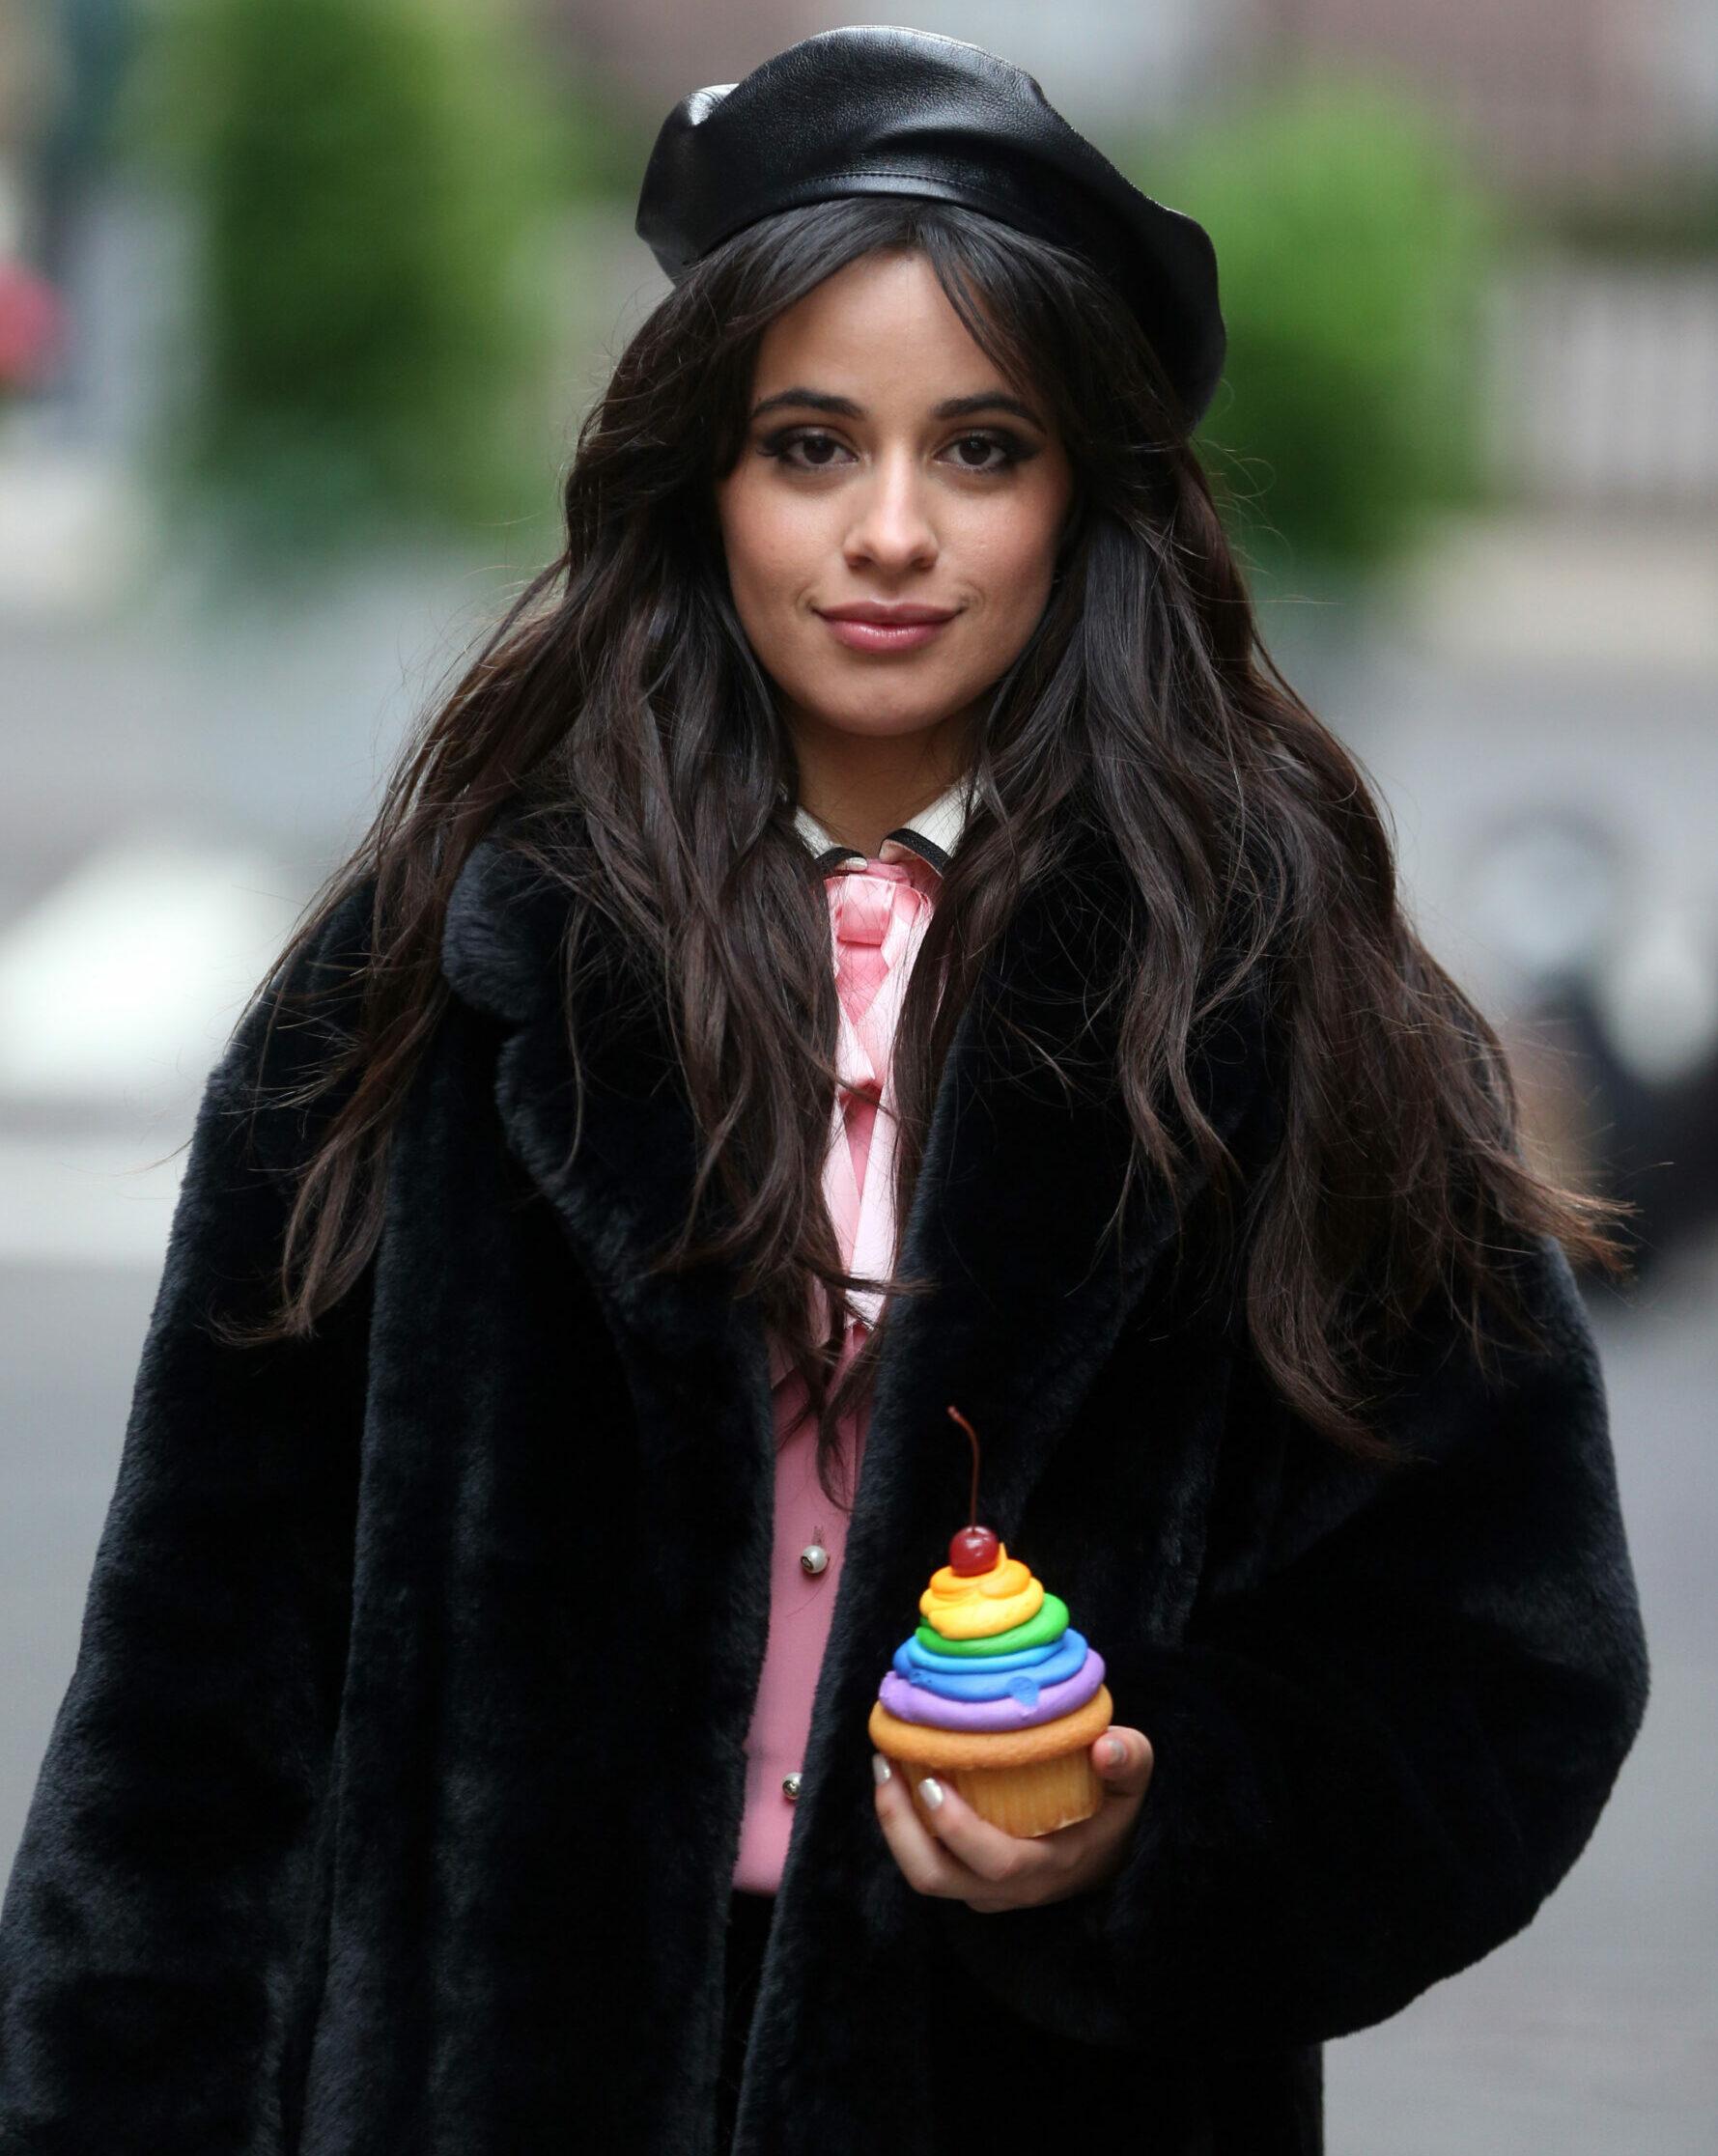 A photo showing Camila Cabello in a black fur jacket and hat to match, holding a rainbow ice-cream.